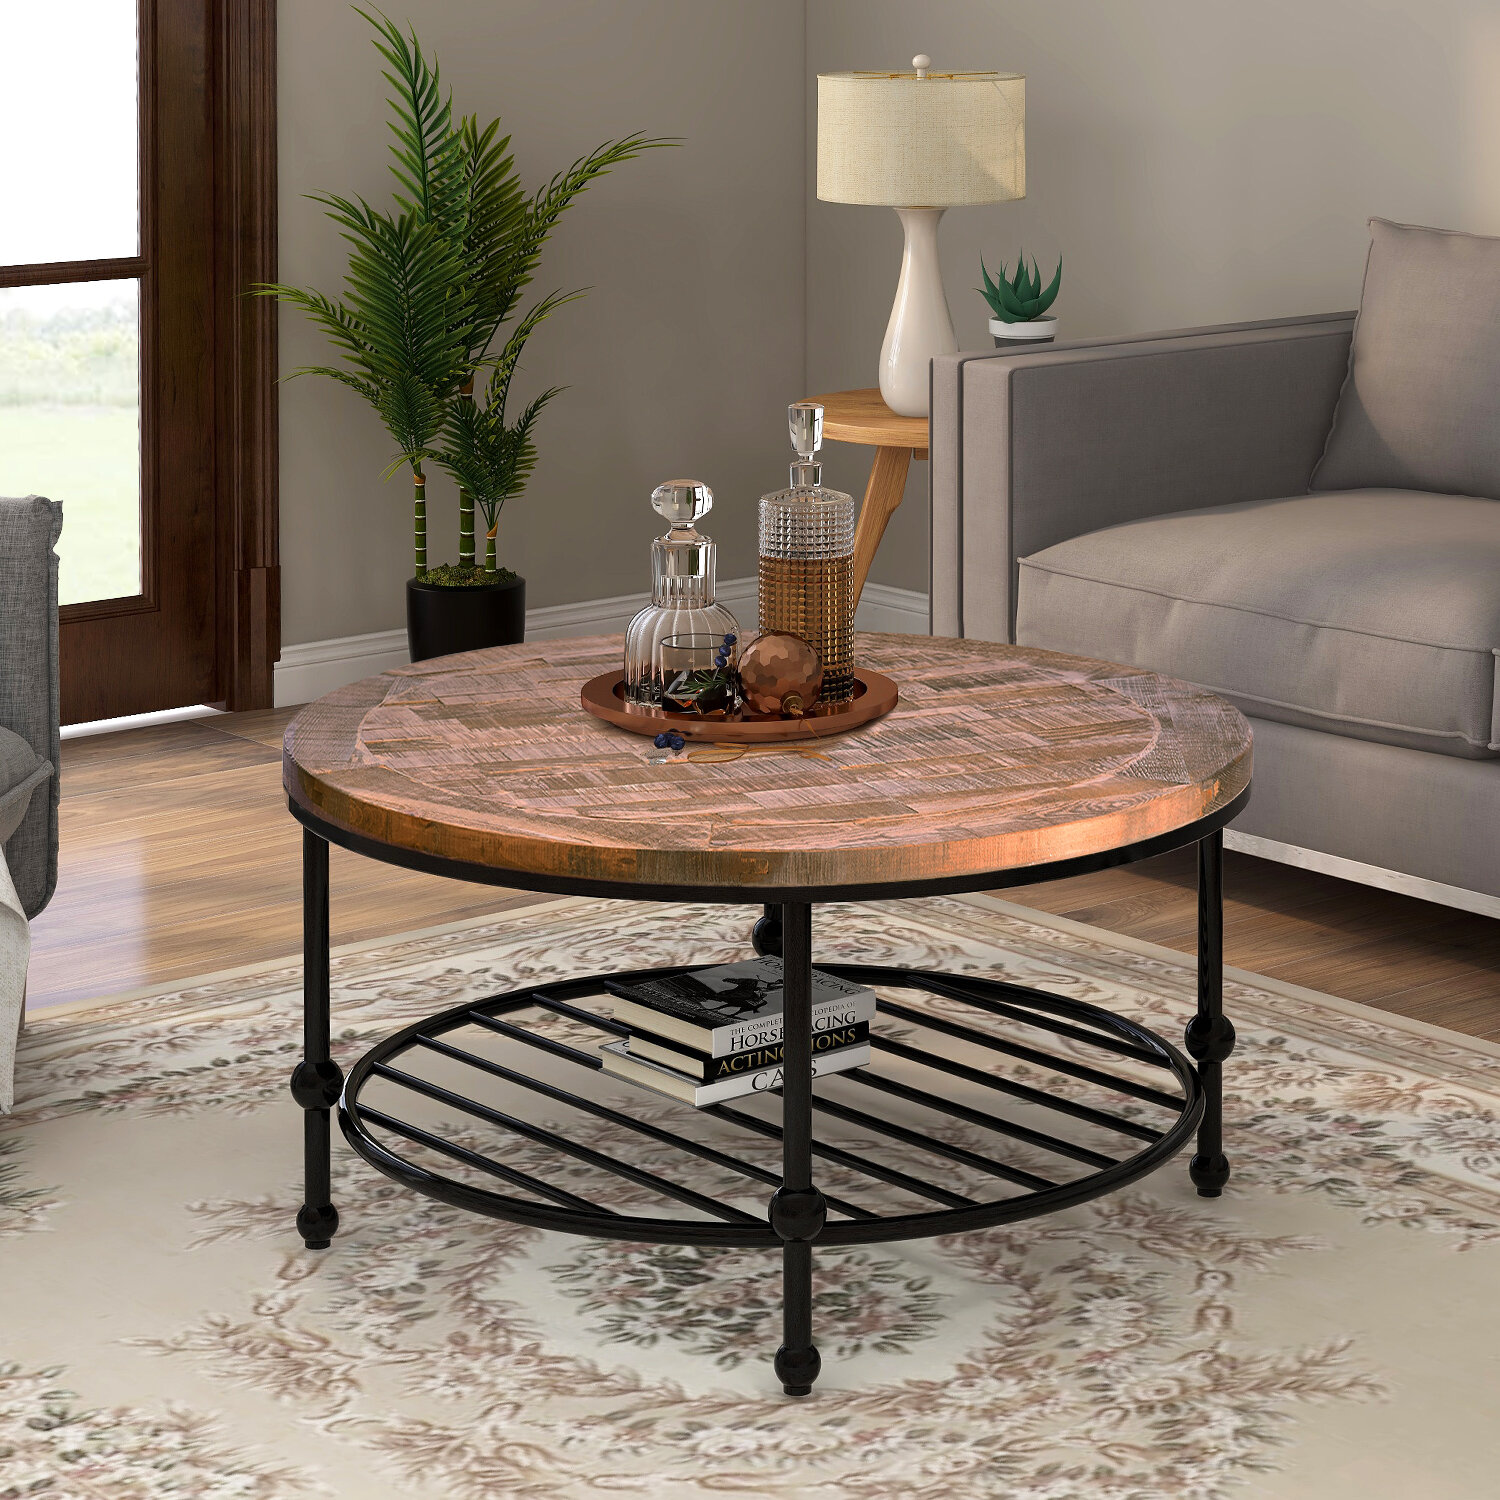 Williston Forge Round Coffee Table With Storage Modern Side Center Tables For Living Room Wayfair